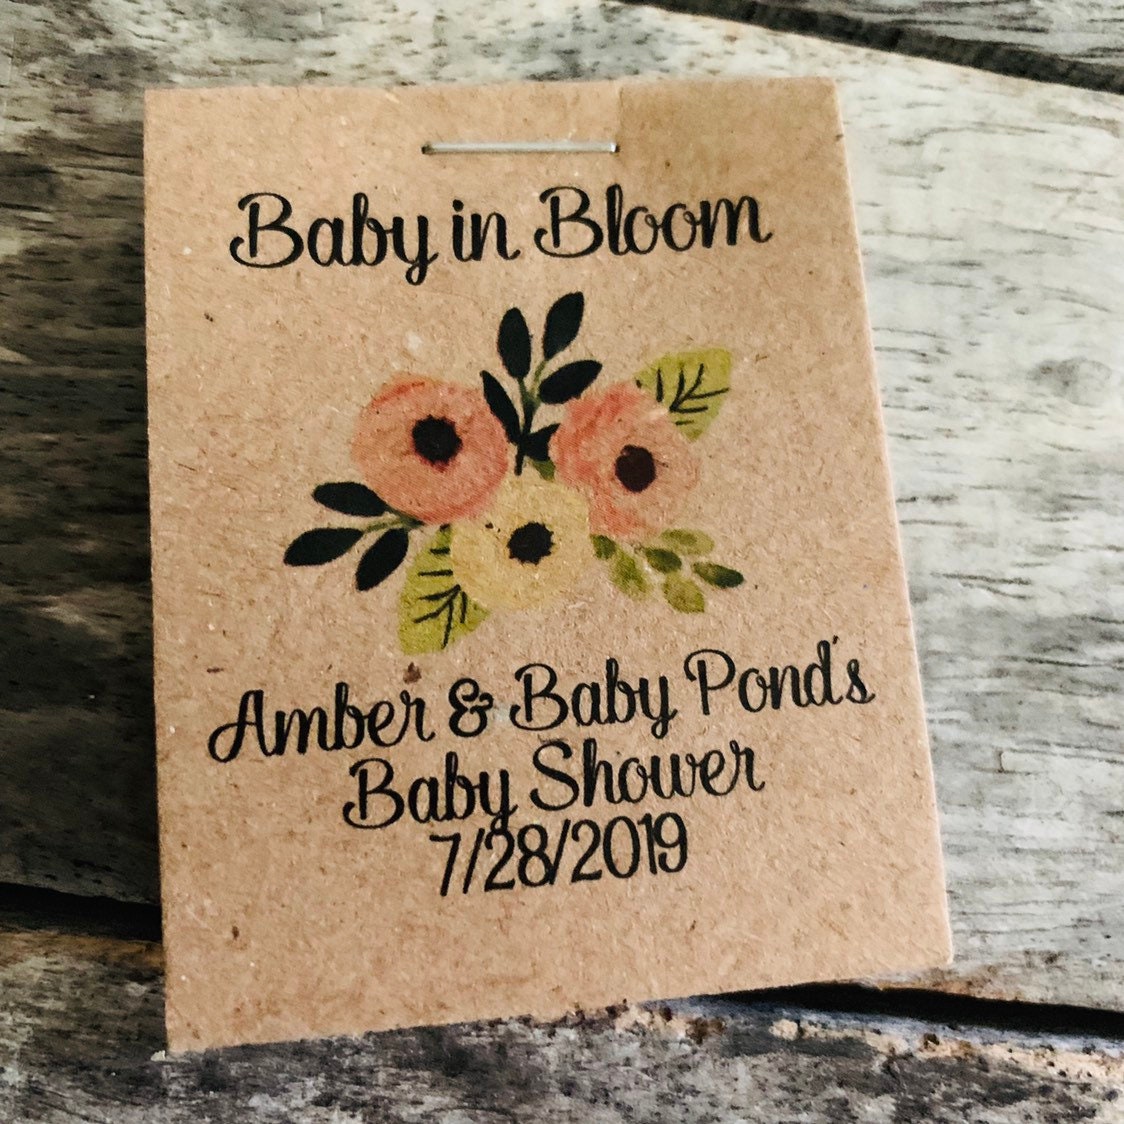 Baby Shower Seed Packet